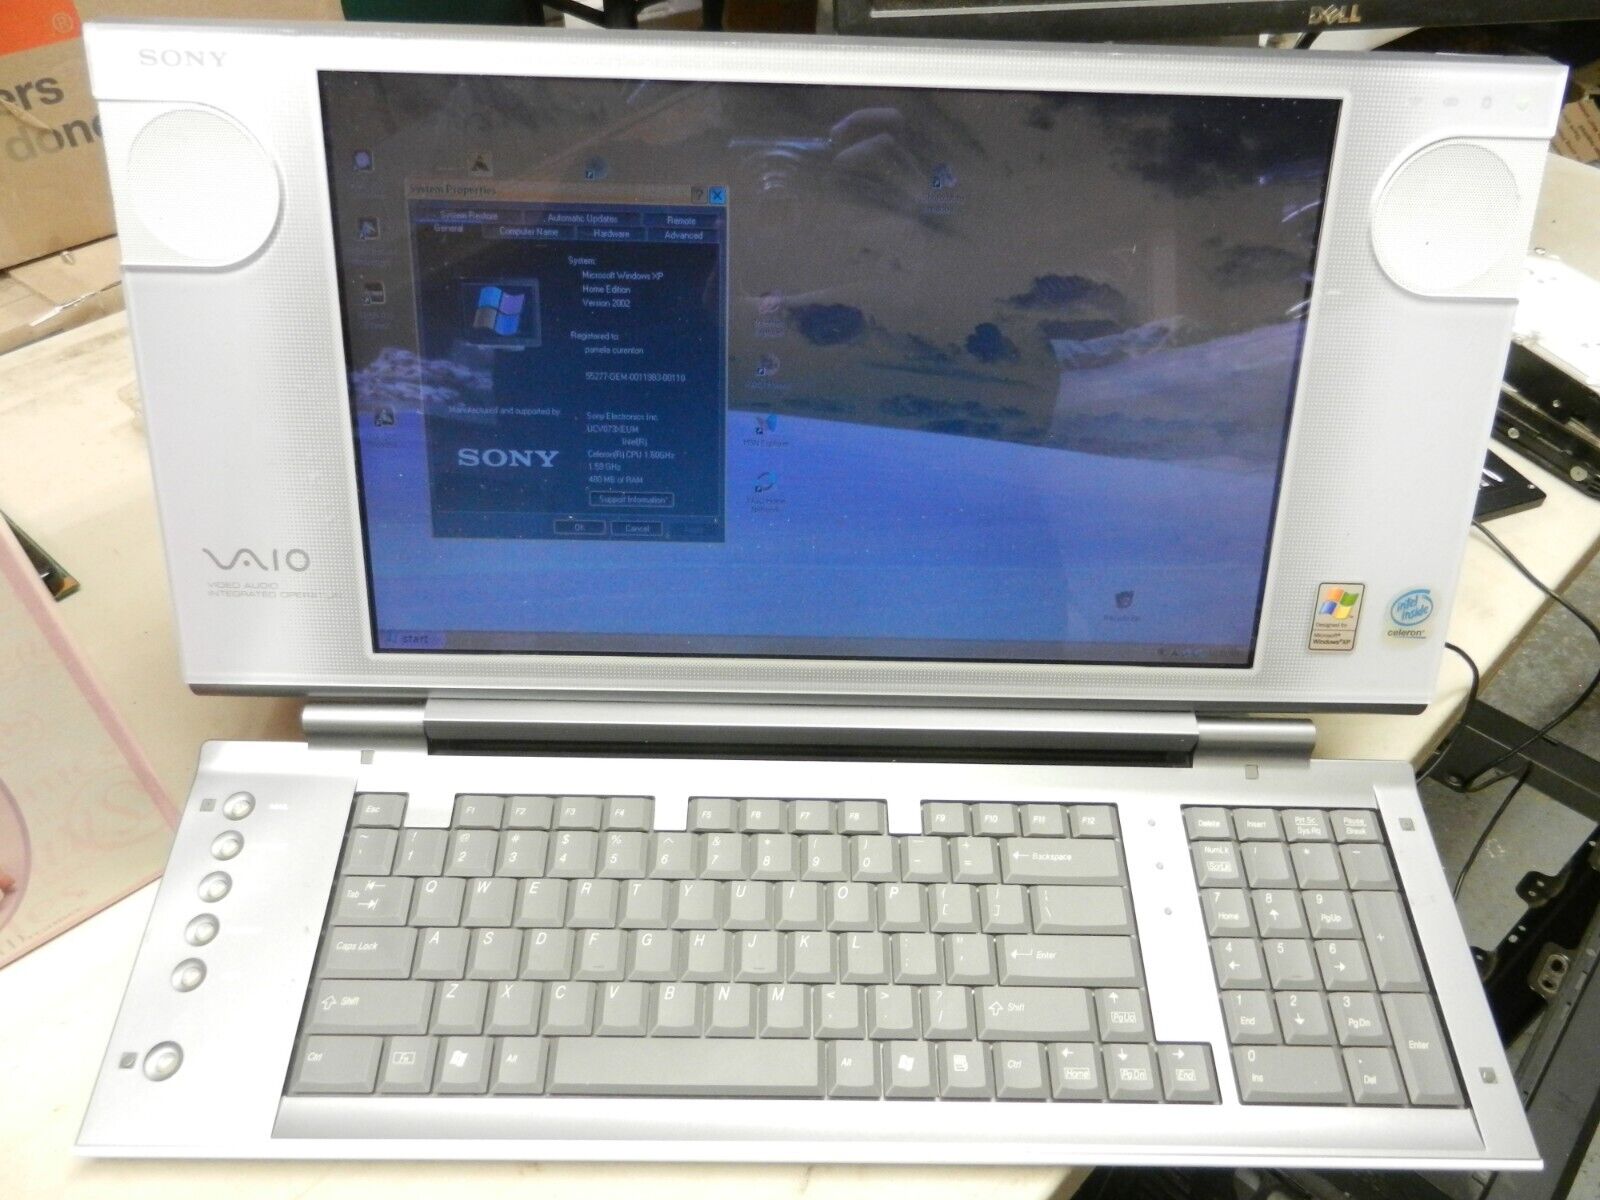 Rare Vintage Sony PCV-W10 All-in-One Personal Computer - 1st VAIO - Works AS-IS